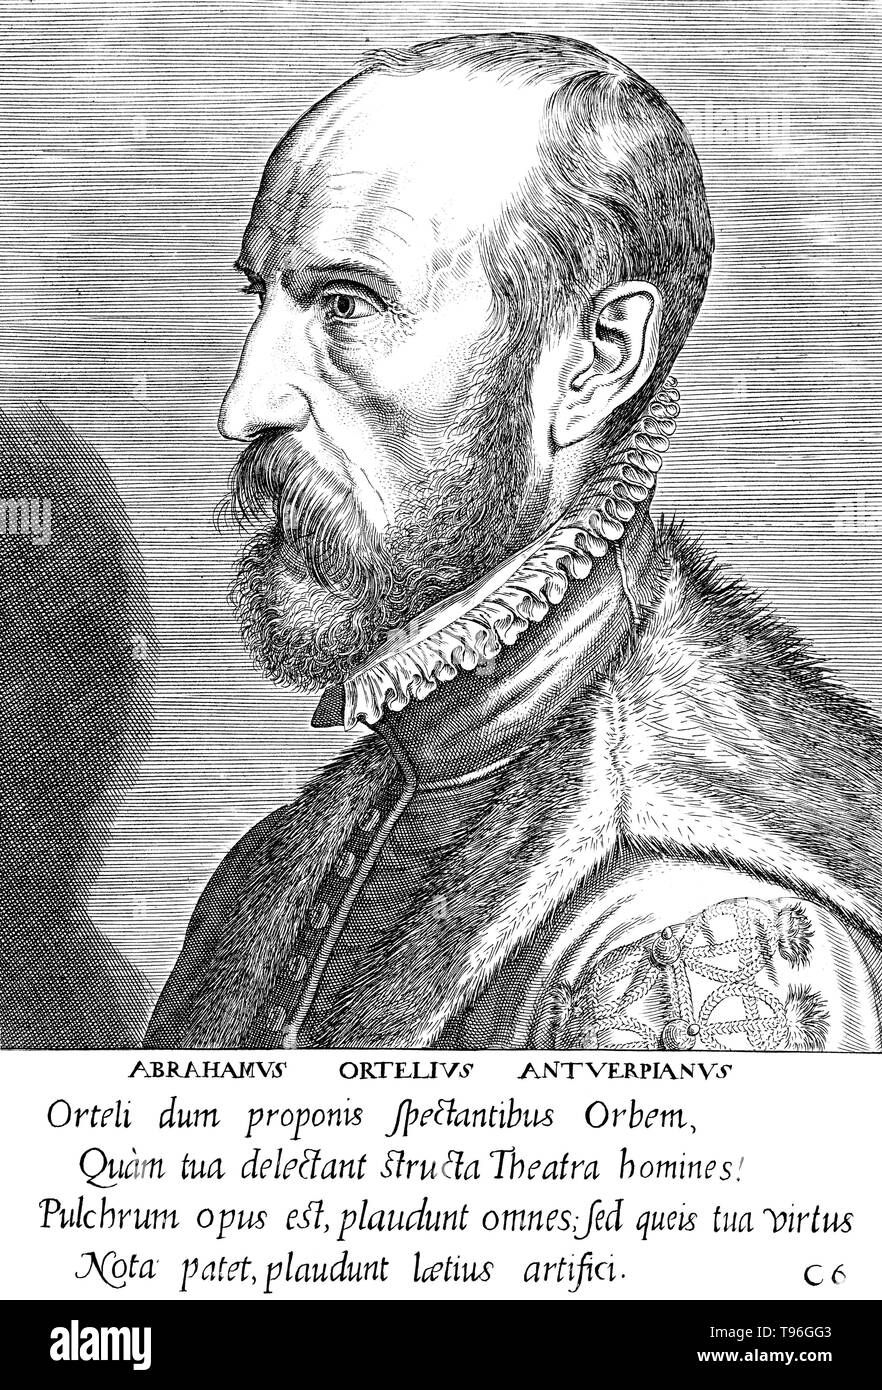 Abraham Ortelius (April 14, 1527 - June 28, 1598) was a Flemish cartographer and geographer. Beginning as a map-engraver, he entered the Antwerp Guild of Saint Luke as an illuminator of maps. He met Gerardus Mercator in 1554, who influenced his decision to become a scientific geographer. In 1564 he published his first map, Typus Orbis Terrarum, an eight-leaved wall map of the world. In 1578 he laid the basis of a critical treatment of ancient geography by his Synonymia geographica. Stock Photo